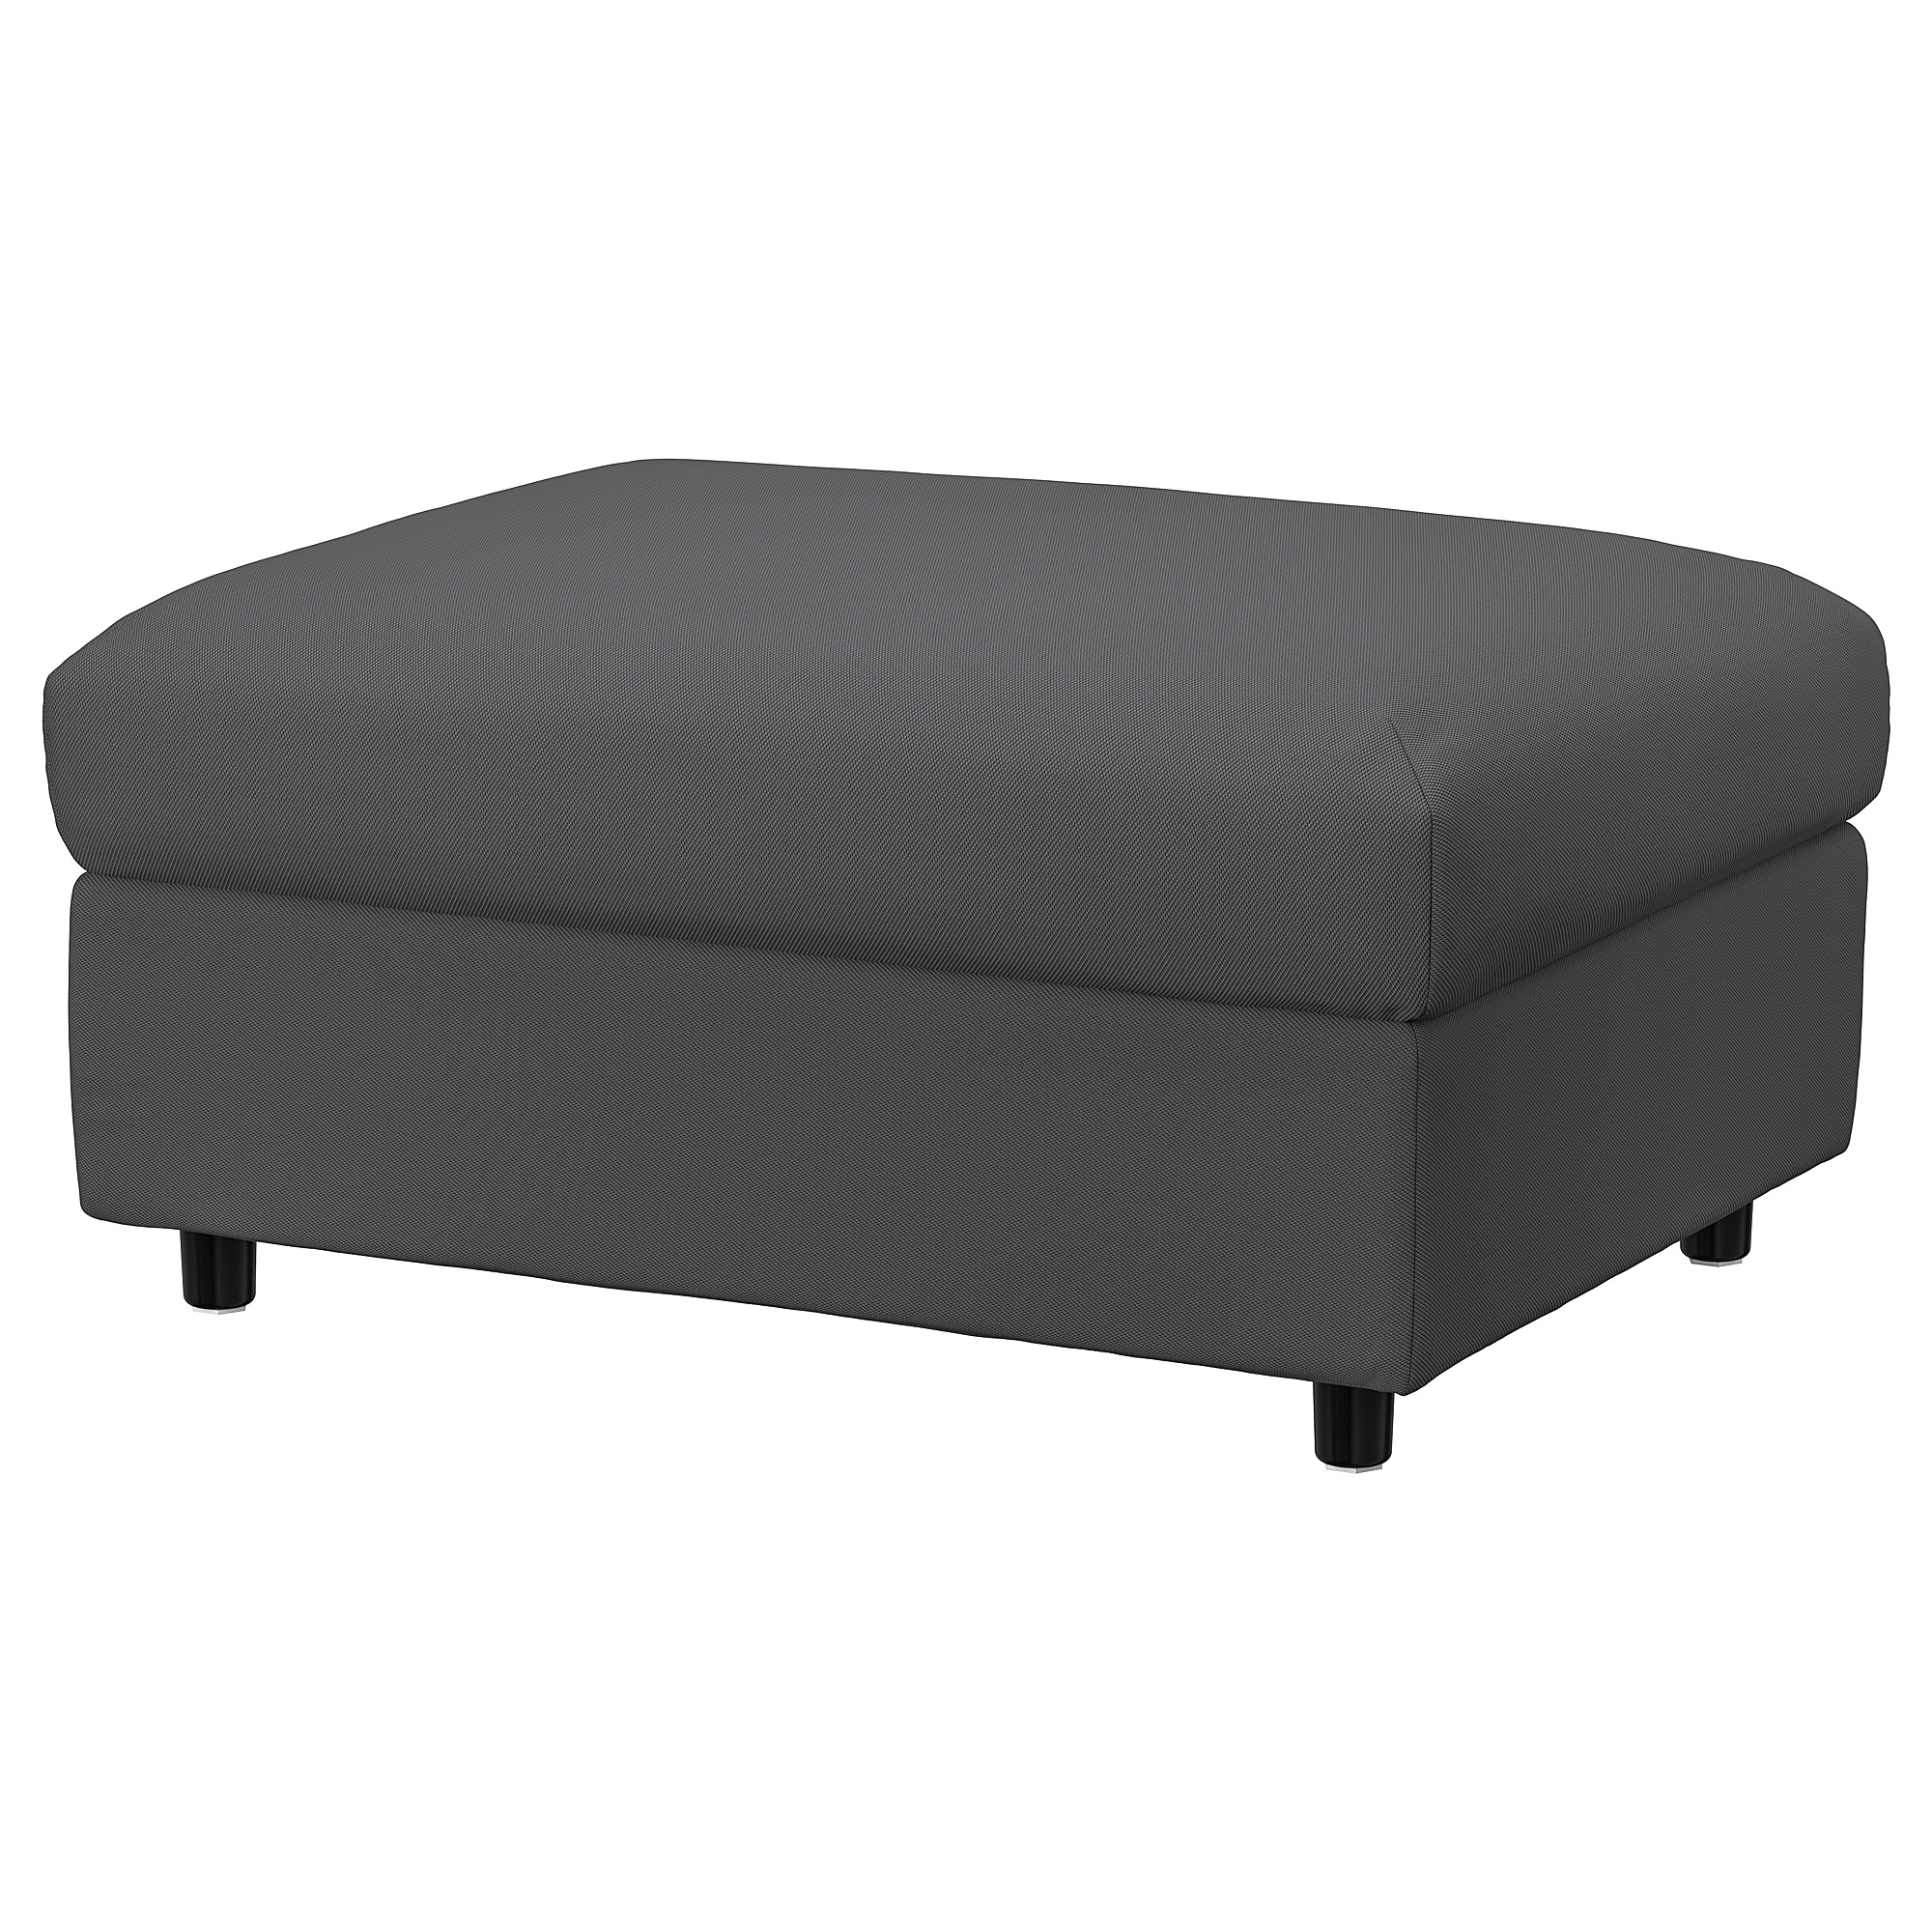 VIMLE cover for footstool with storage